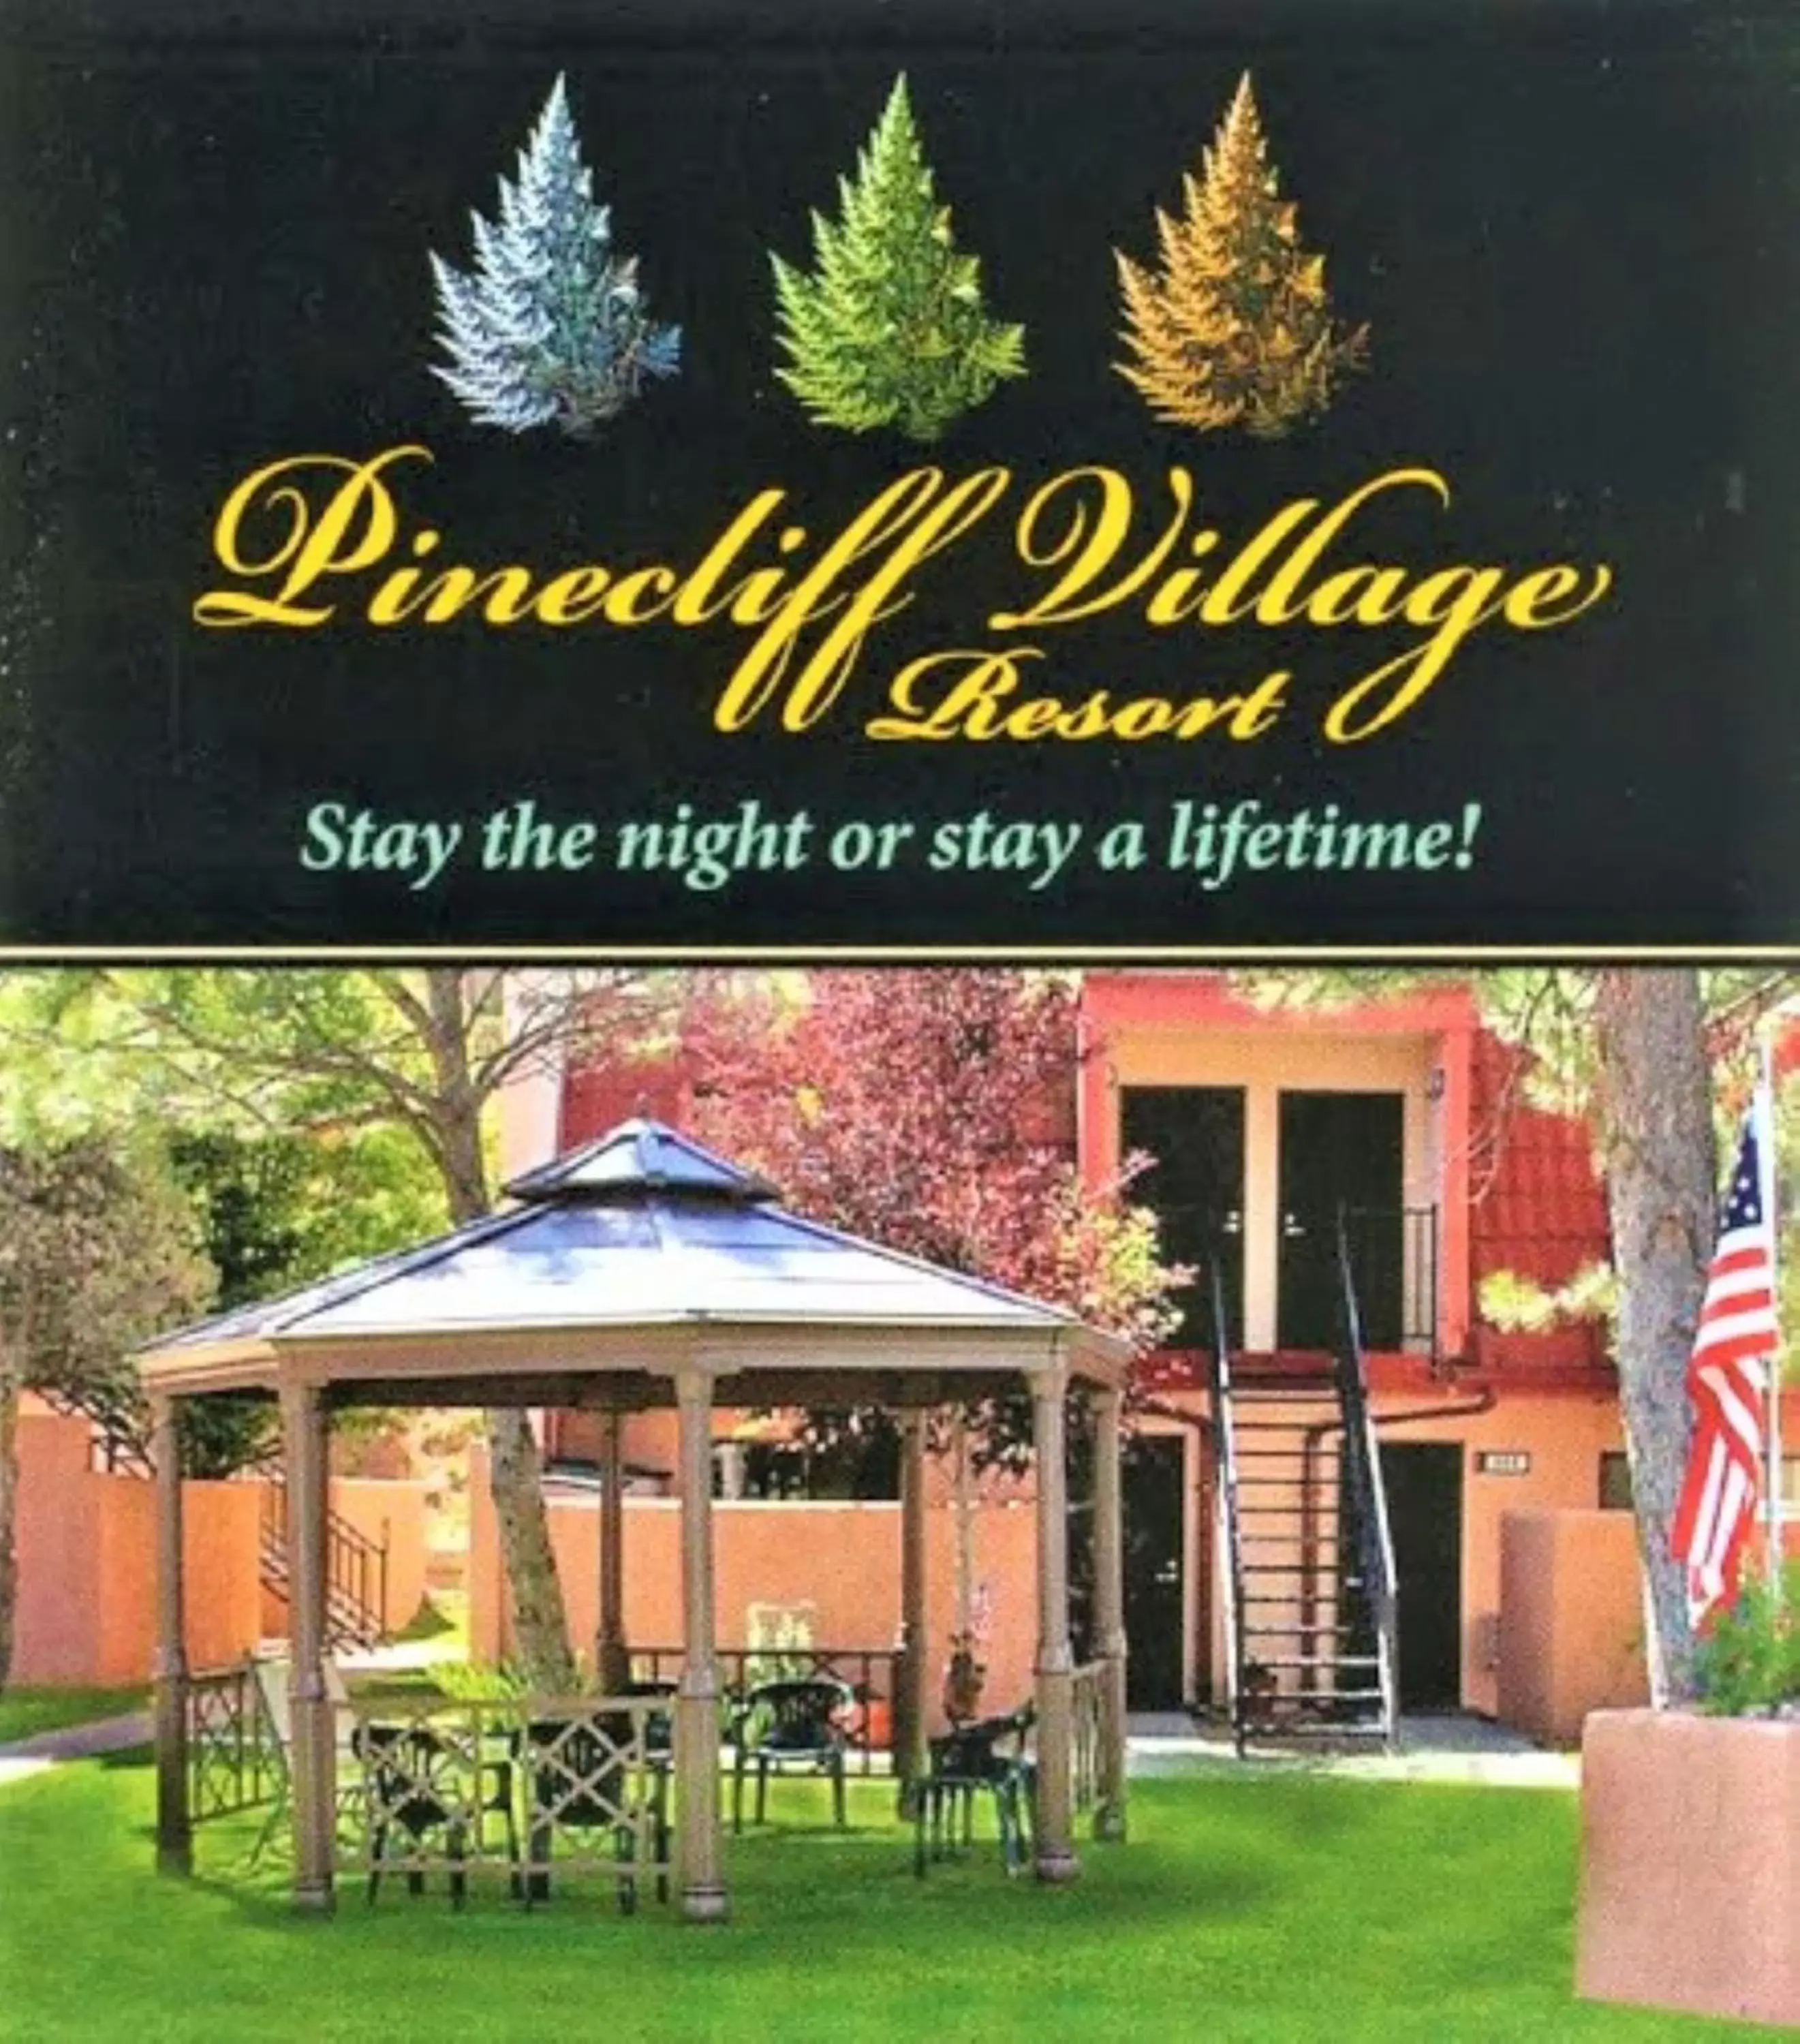 Area and facilities in Pinecliff Village Resort